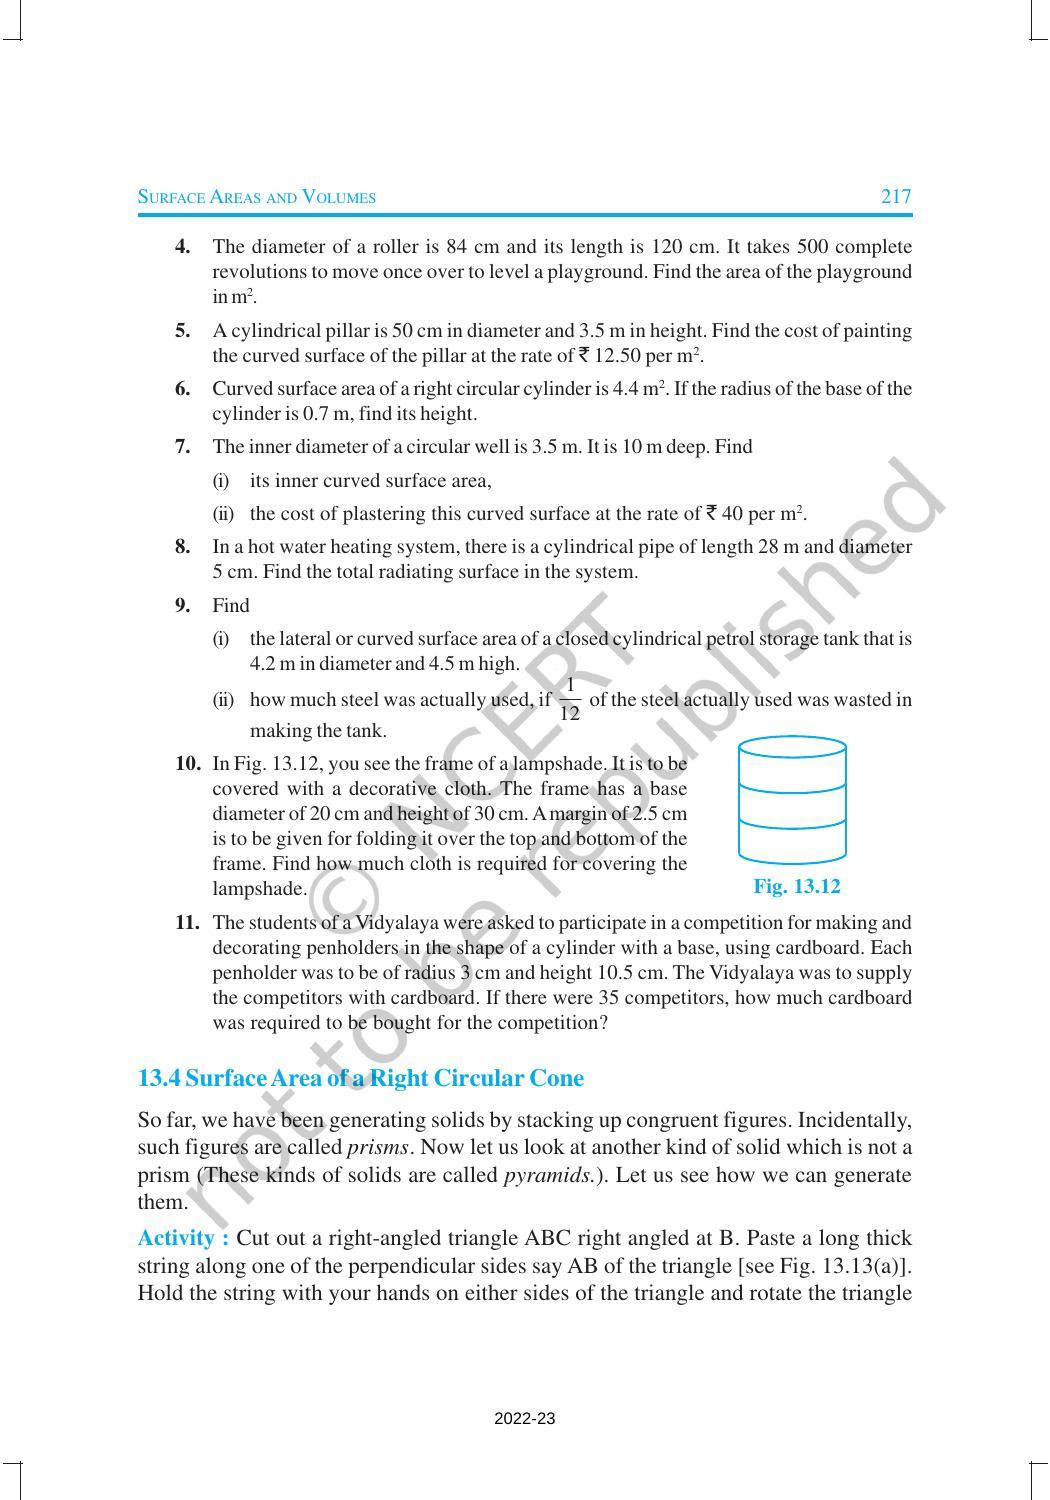 NCERT Book for Class 9 Maths Chapter 13 Surface Areas and Volumes - Page 10